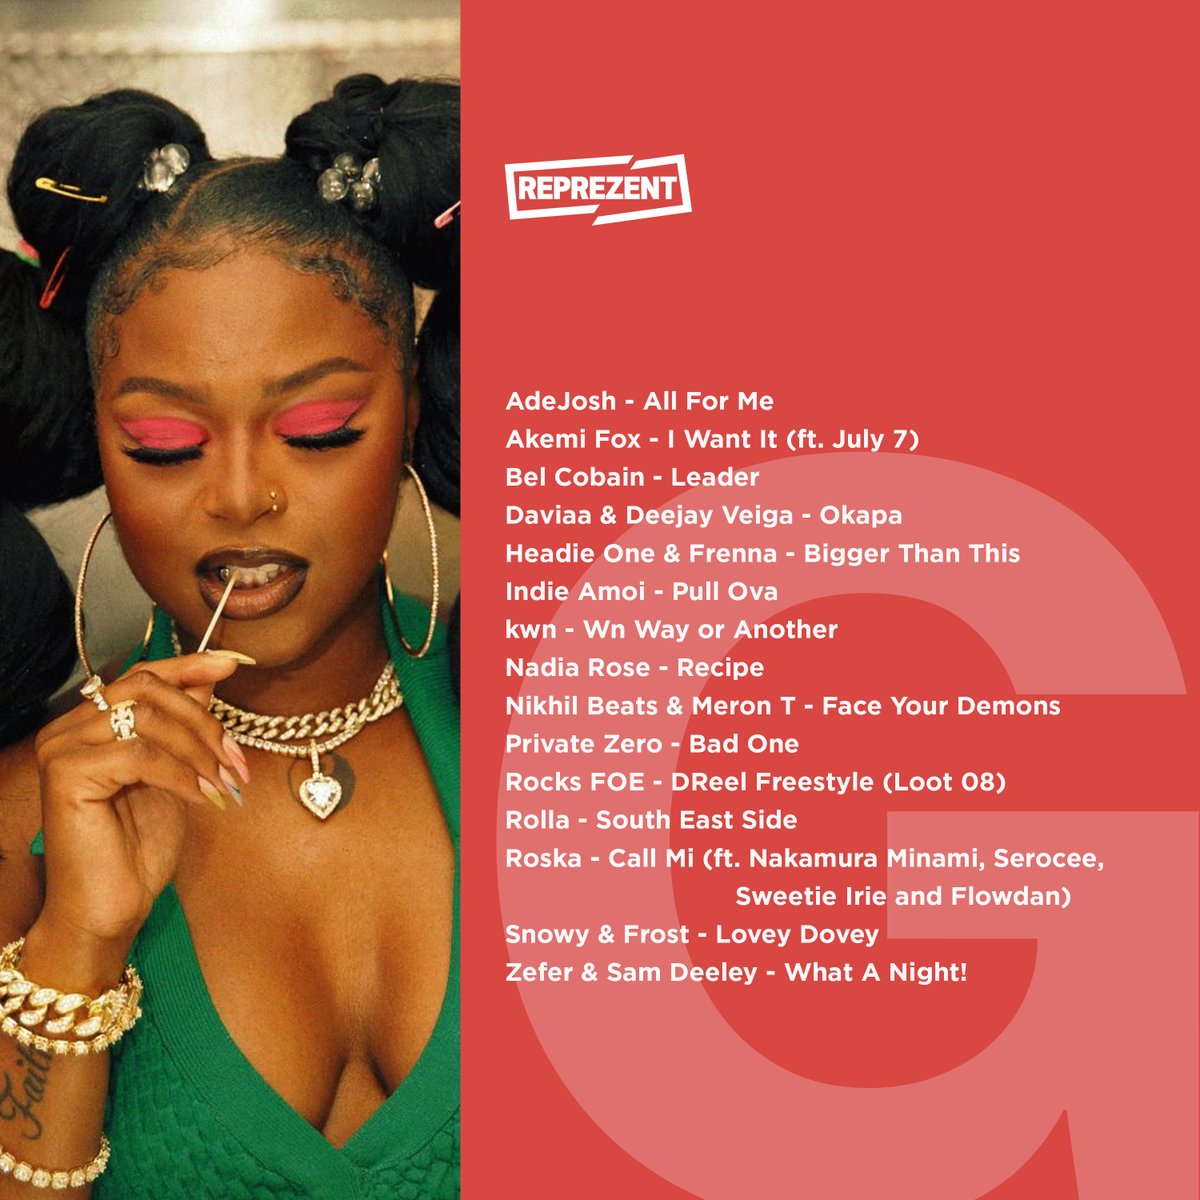 The Sound of Reprezent - our playlist for the next fortnight includes new @yungfilly1, @JordsOnline, @ama_louise, @nadiarosemusic and many many more Hear them all on 107.3FM / DAB (London) and a new online address: reprezentradio.org.uk 📣